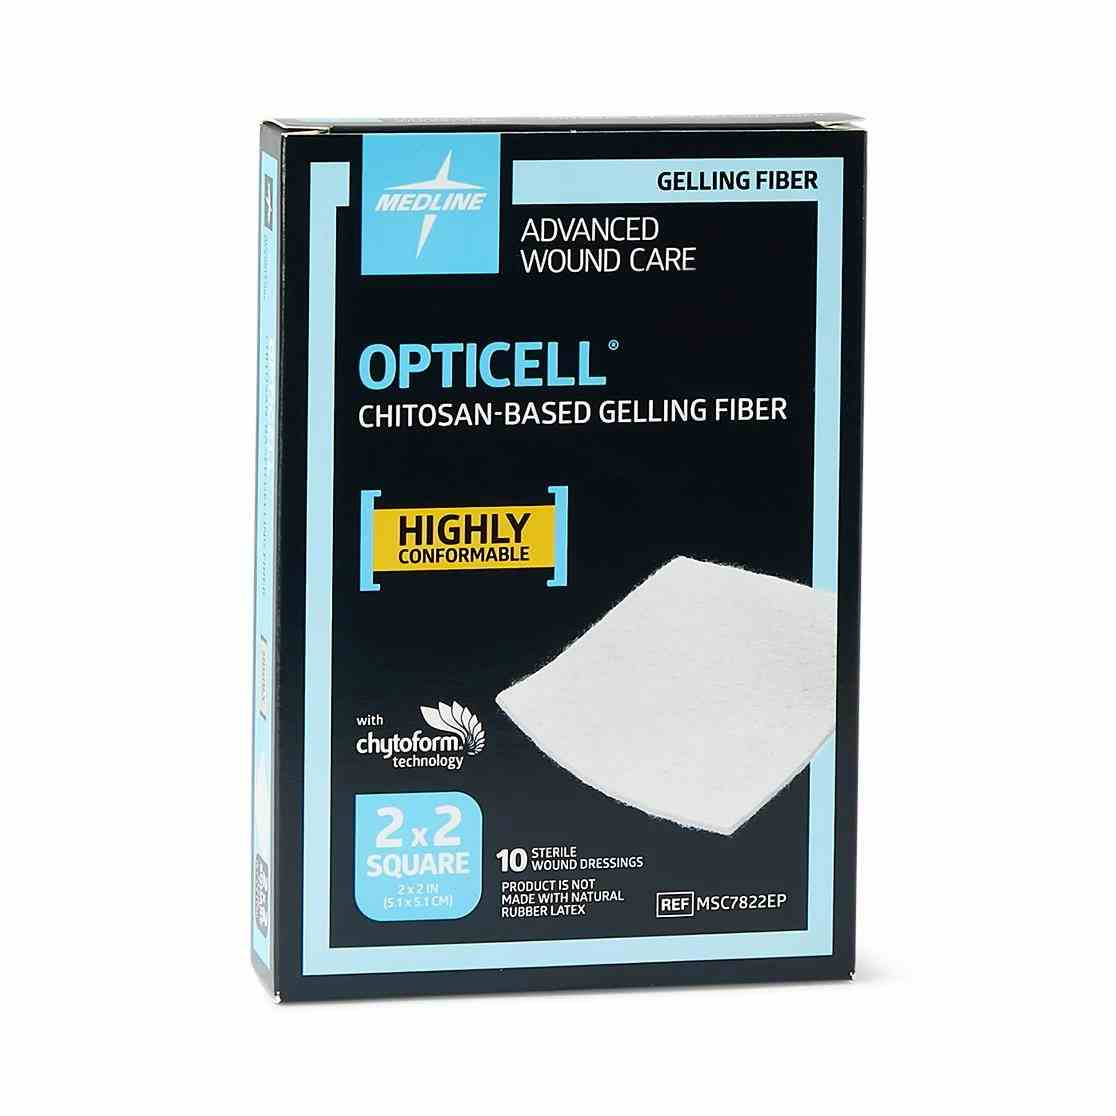 Medline Opticell Chitosan-Based Gelling Fiber Wound Dressing, MSC7822EPZ, 2" X 2" - Box of 10